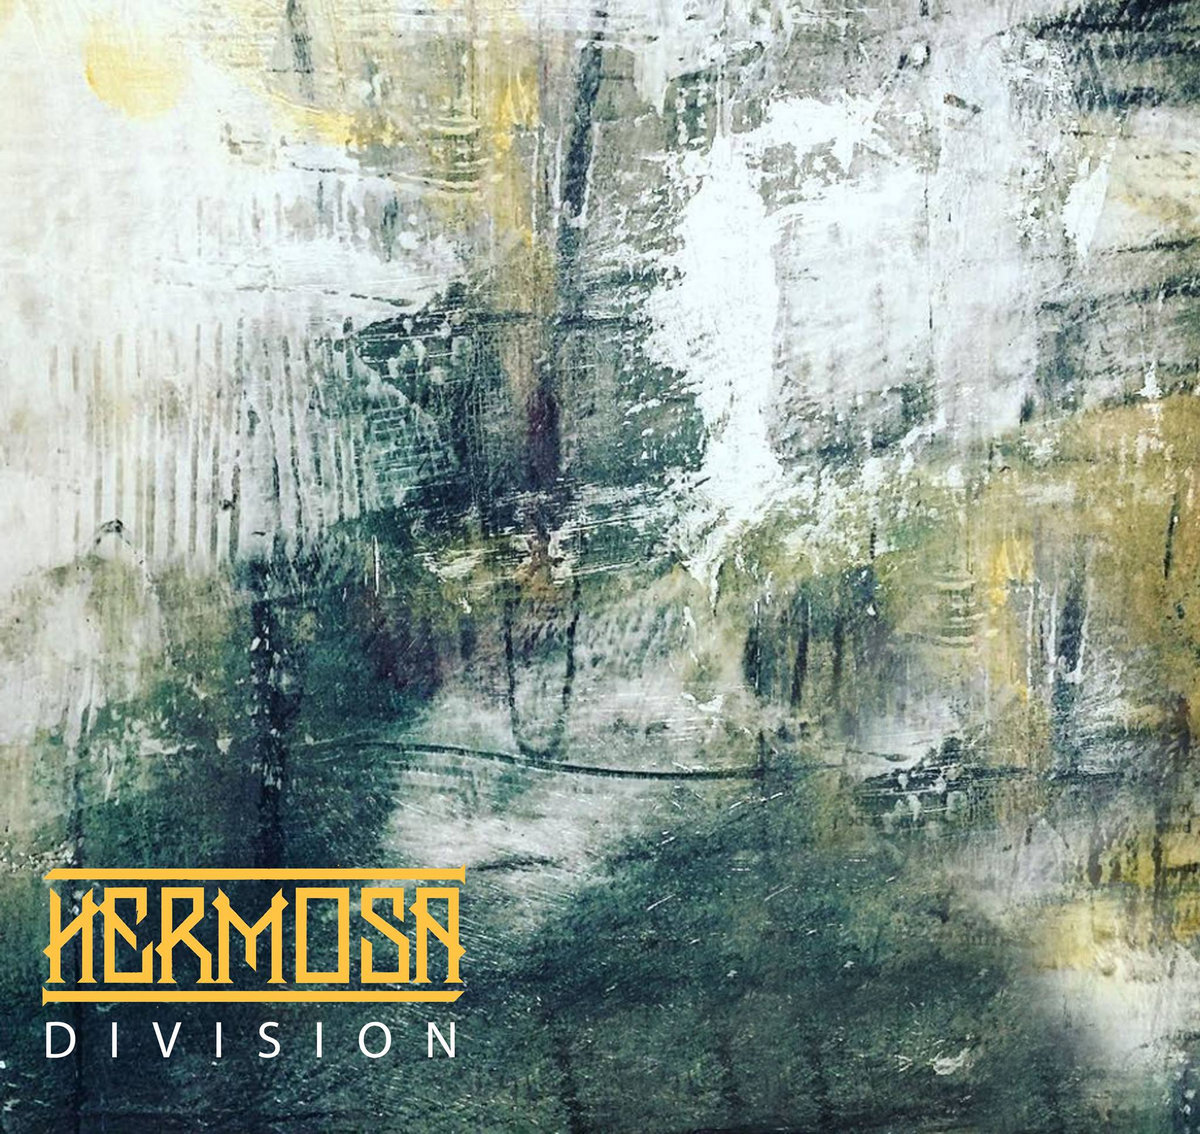 Hermosa - Division [EP] (2016)